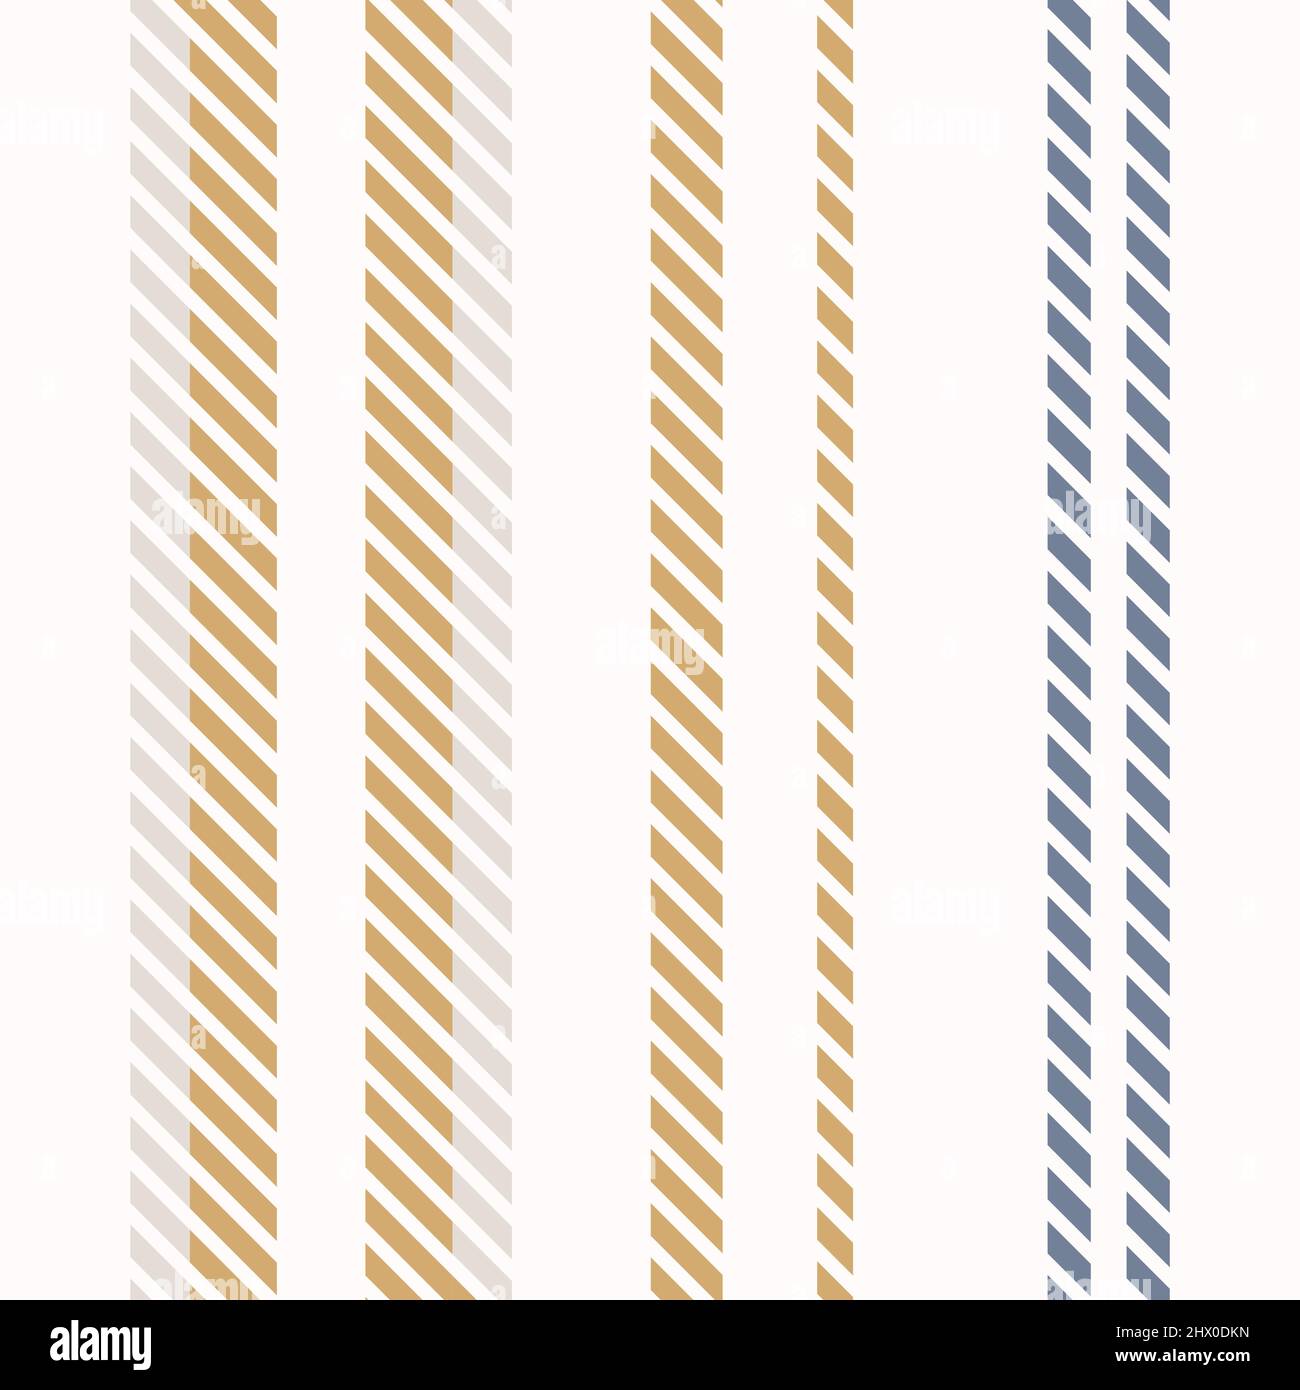 Seamless French country kitchen stitch stripe fabric pattern print. Yellow white vertical striped background. Batik dye provence style rustic woven Stock Vector